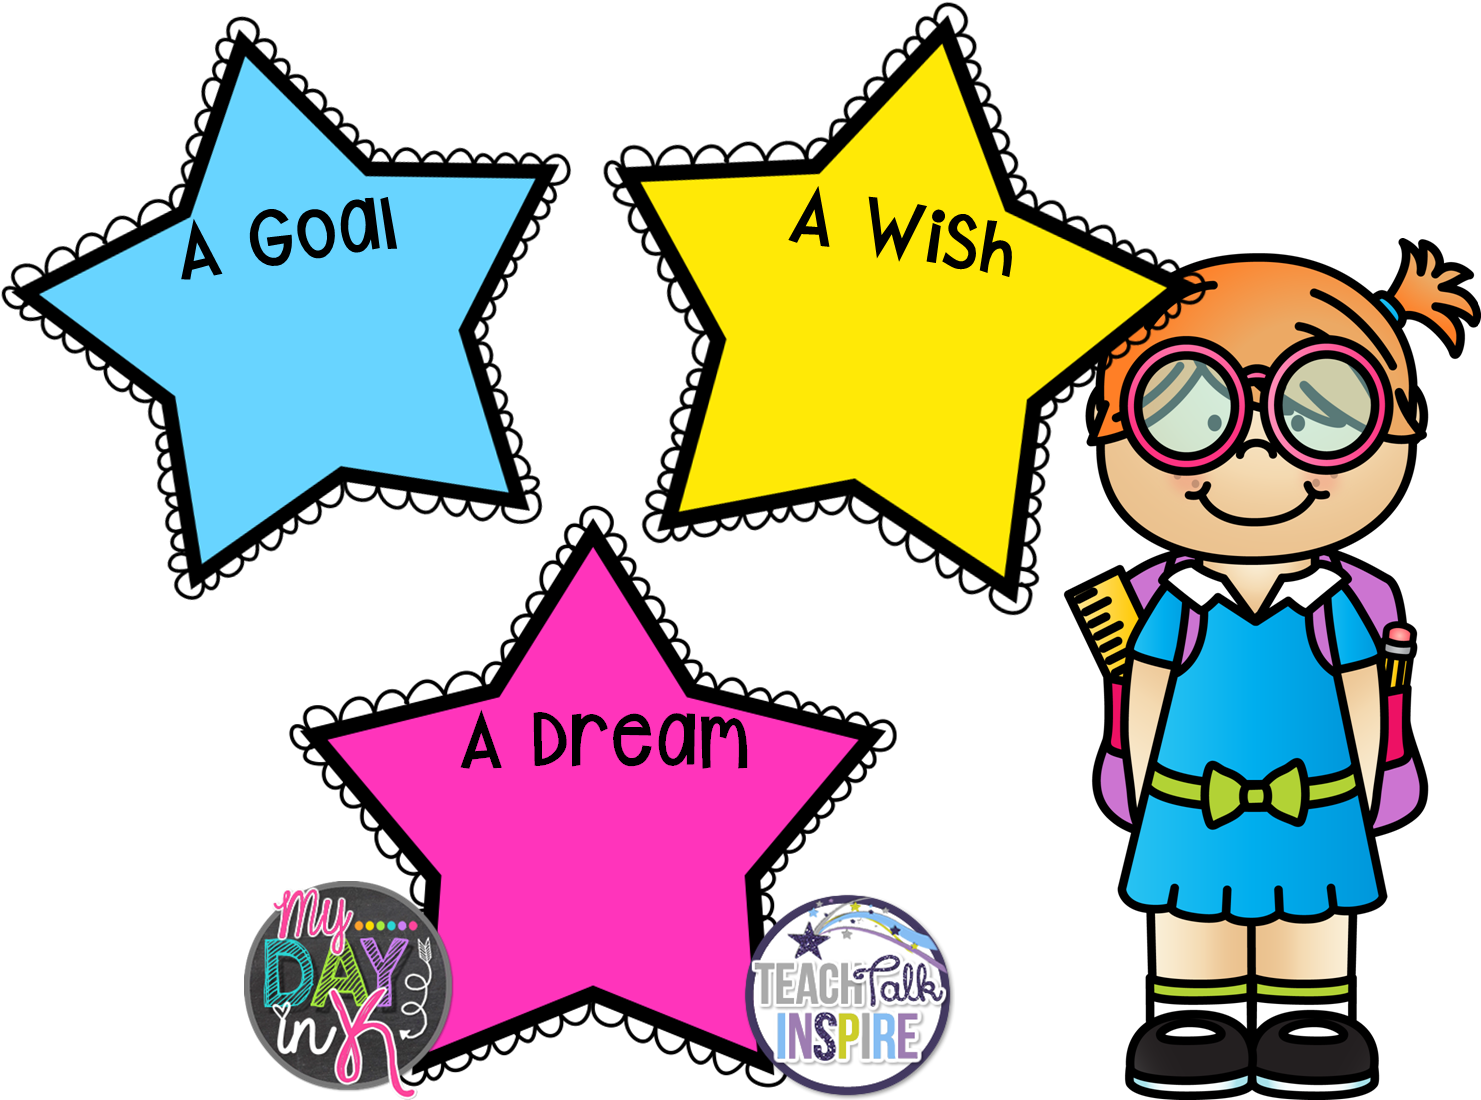 What Is Your Goal, Wish, And Dream For The New School - What Is Your Goal, Wish, And Dream For The New School (1577x1231)